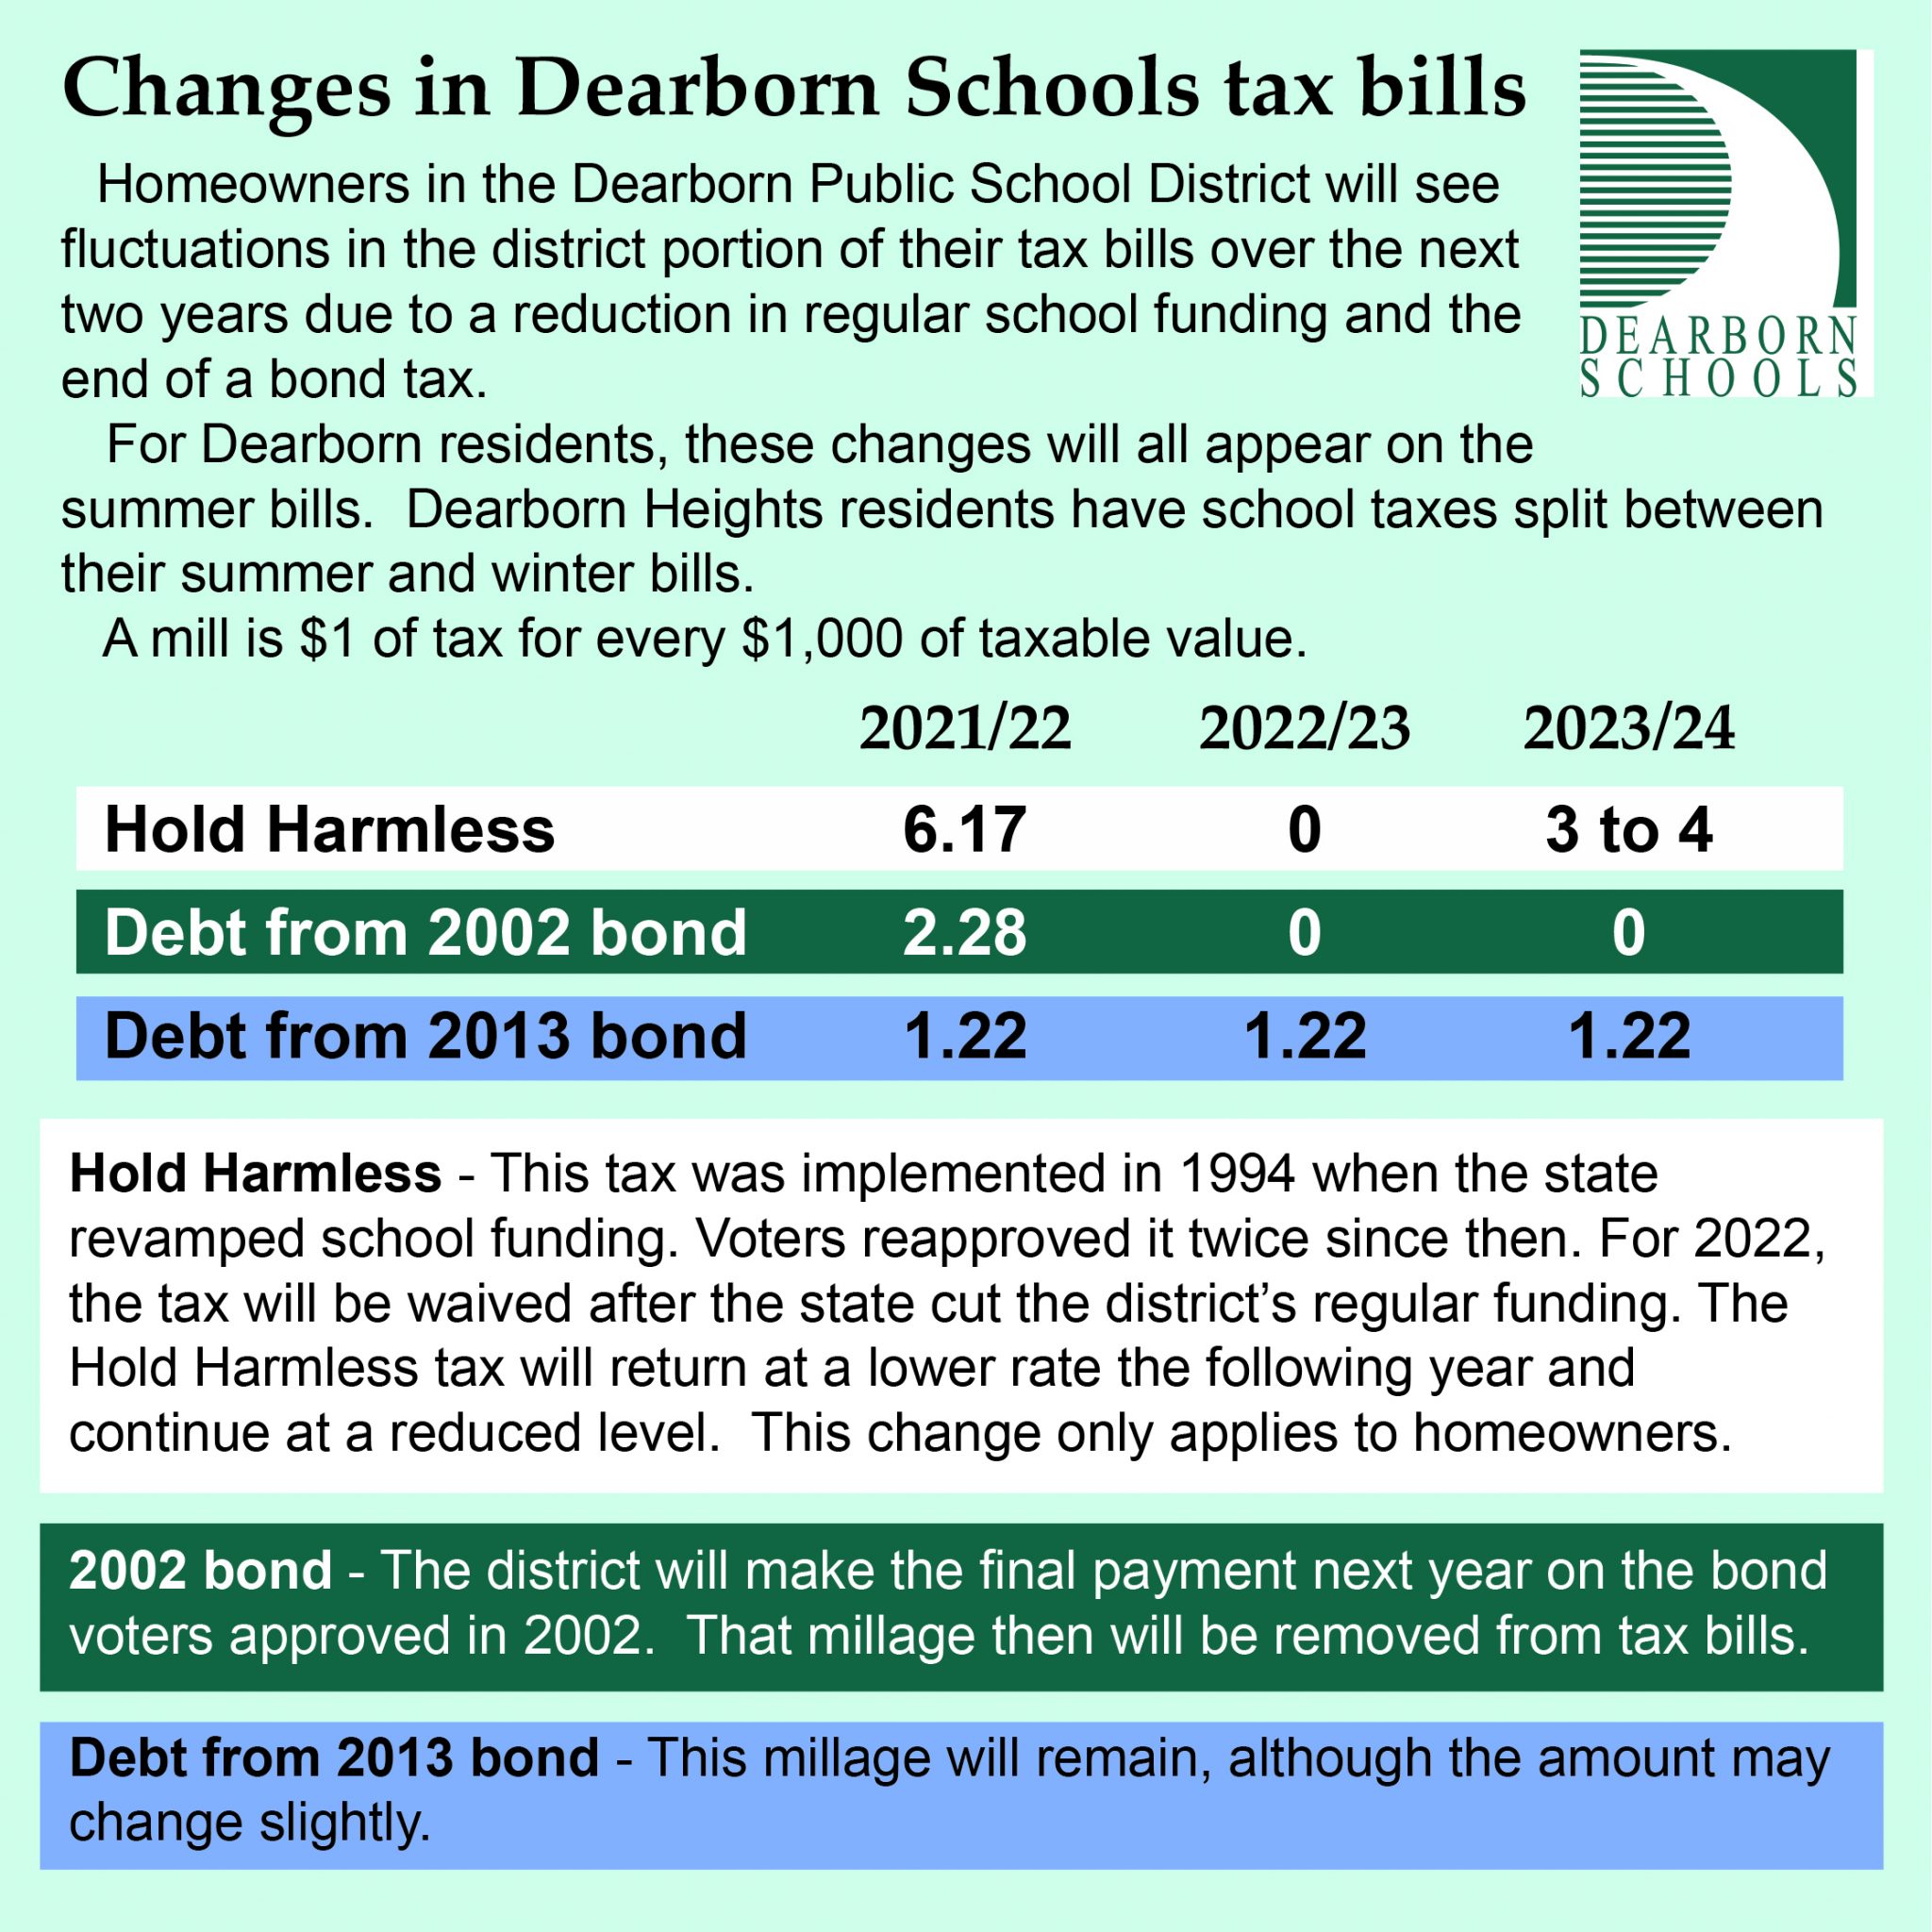 Changes in Dearborn Schools tax bills. Homeowners in the Dearborn Public School District will see fluctuations in the district portion of their tax bills over the next two yeas due to a reduction in regular school funding and the end of a bond tax. For Dearborn residents, these changes will all appear on the summer bills. Dearborn Heights residents have school taxes split between their summer and winter bills. A mill is $1 of tax for every $1,000 of taxable value. Hold Harmless 2021/22- 6.17 mills 2022/23 - 0 2023/24 - 3 to 4 mills Debt from 2002 bond 2021/22- 2.28 mill 2022/23 - 0 2023/24 - 0 Debt from 2013 bond 2021/22 - 1.22 mill 2022/23 - 1.22 mill 2023/24 - 1.22 mill Hold Harmless - This tax was implemented in 194 when the state revamped school funding. Voters reapproved it twice since then. For 2022 the tax will be waived afte rthe state cut the district's regular funding. The Hold Harmless tax will return at a lower rate the following year and continue at a reduced level. This change only applies to homeowners. 2022 bond - The district will make the final payment next year on the bond voters approved in 2002. That millage will be removed from tax bills. Debt from 2013 bond - This millage will remain, although the amount may change slightly.